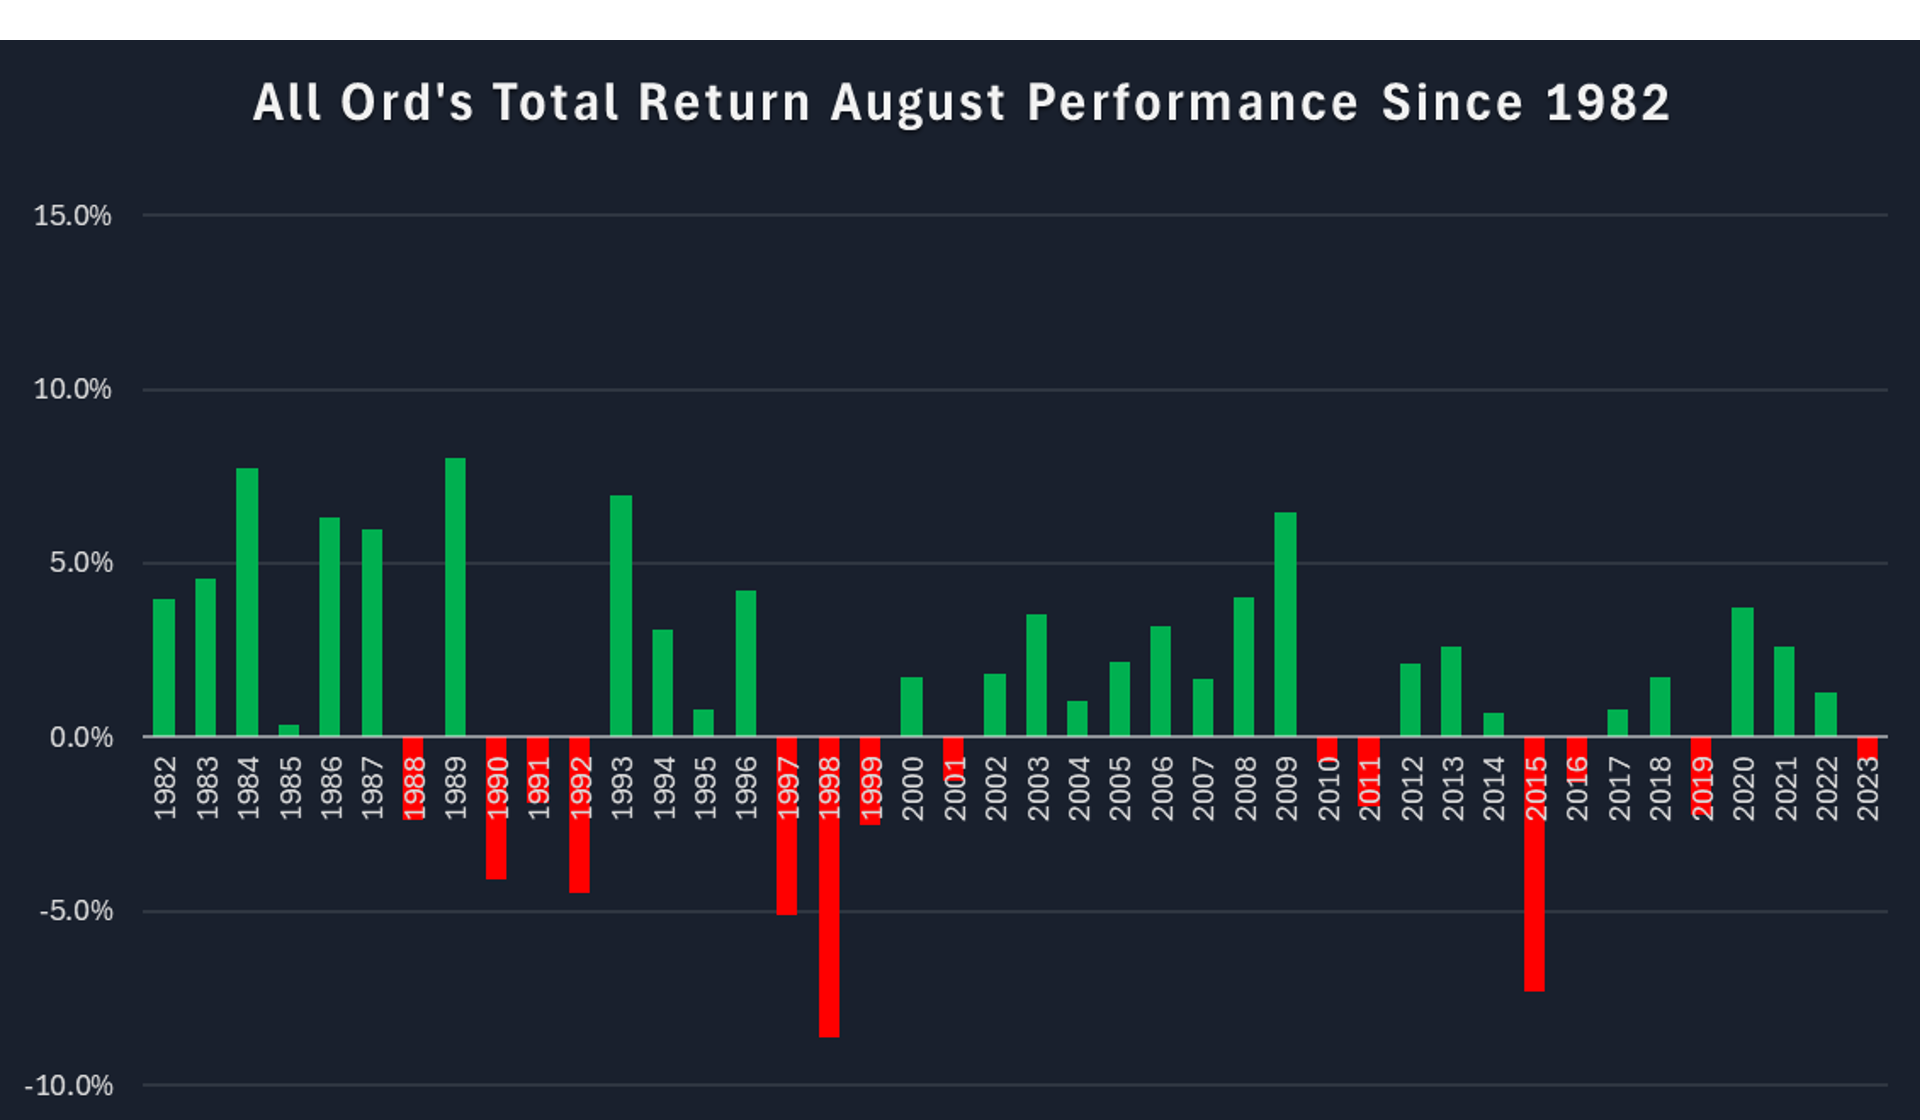 All Ords TR August Performance Since 1982